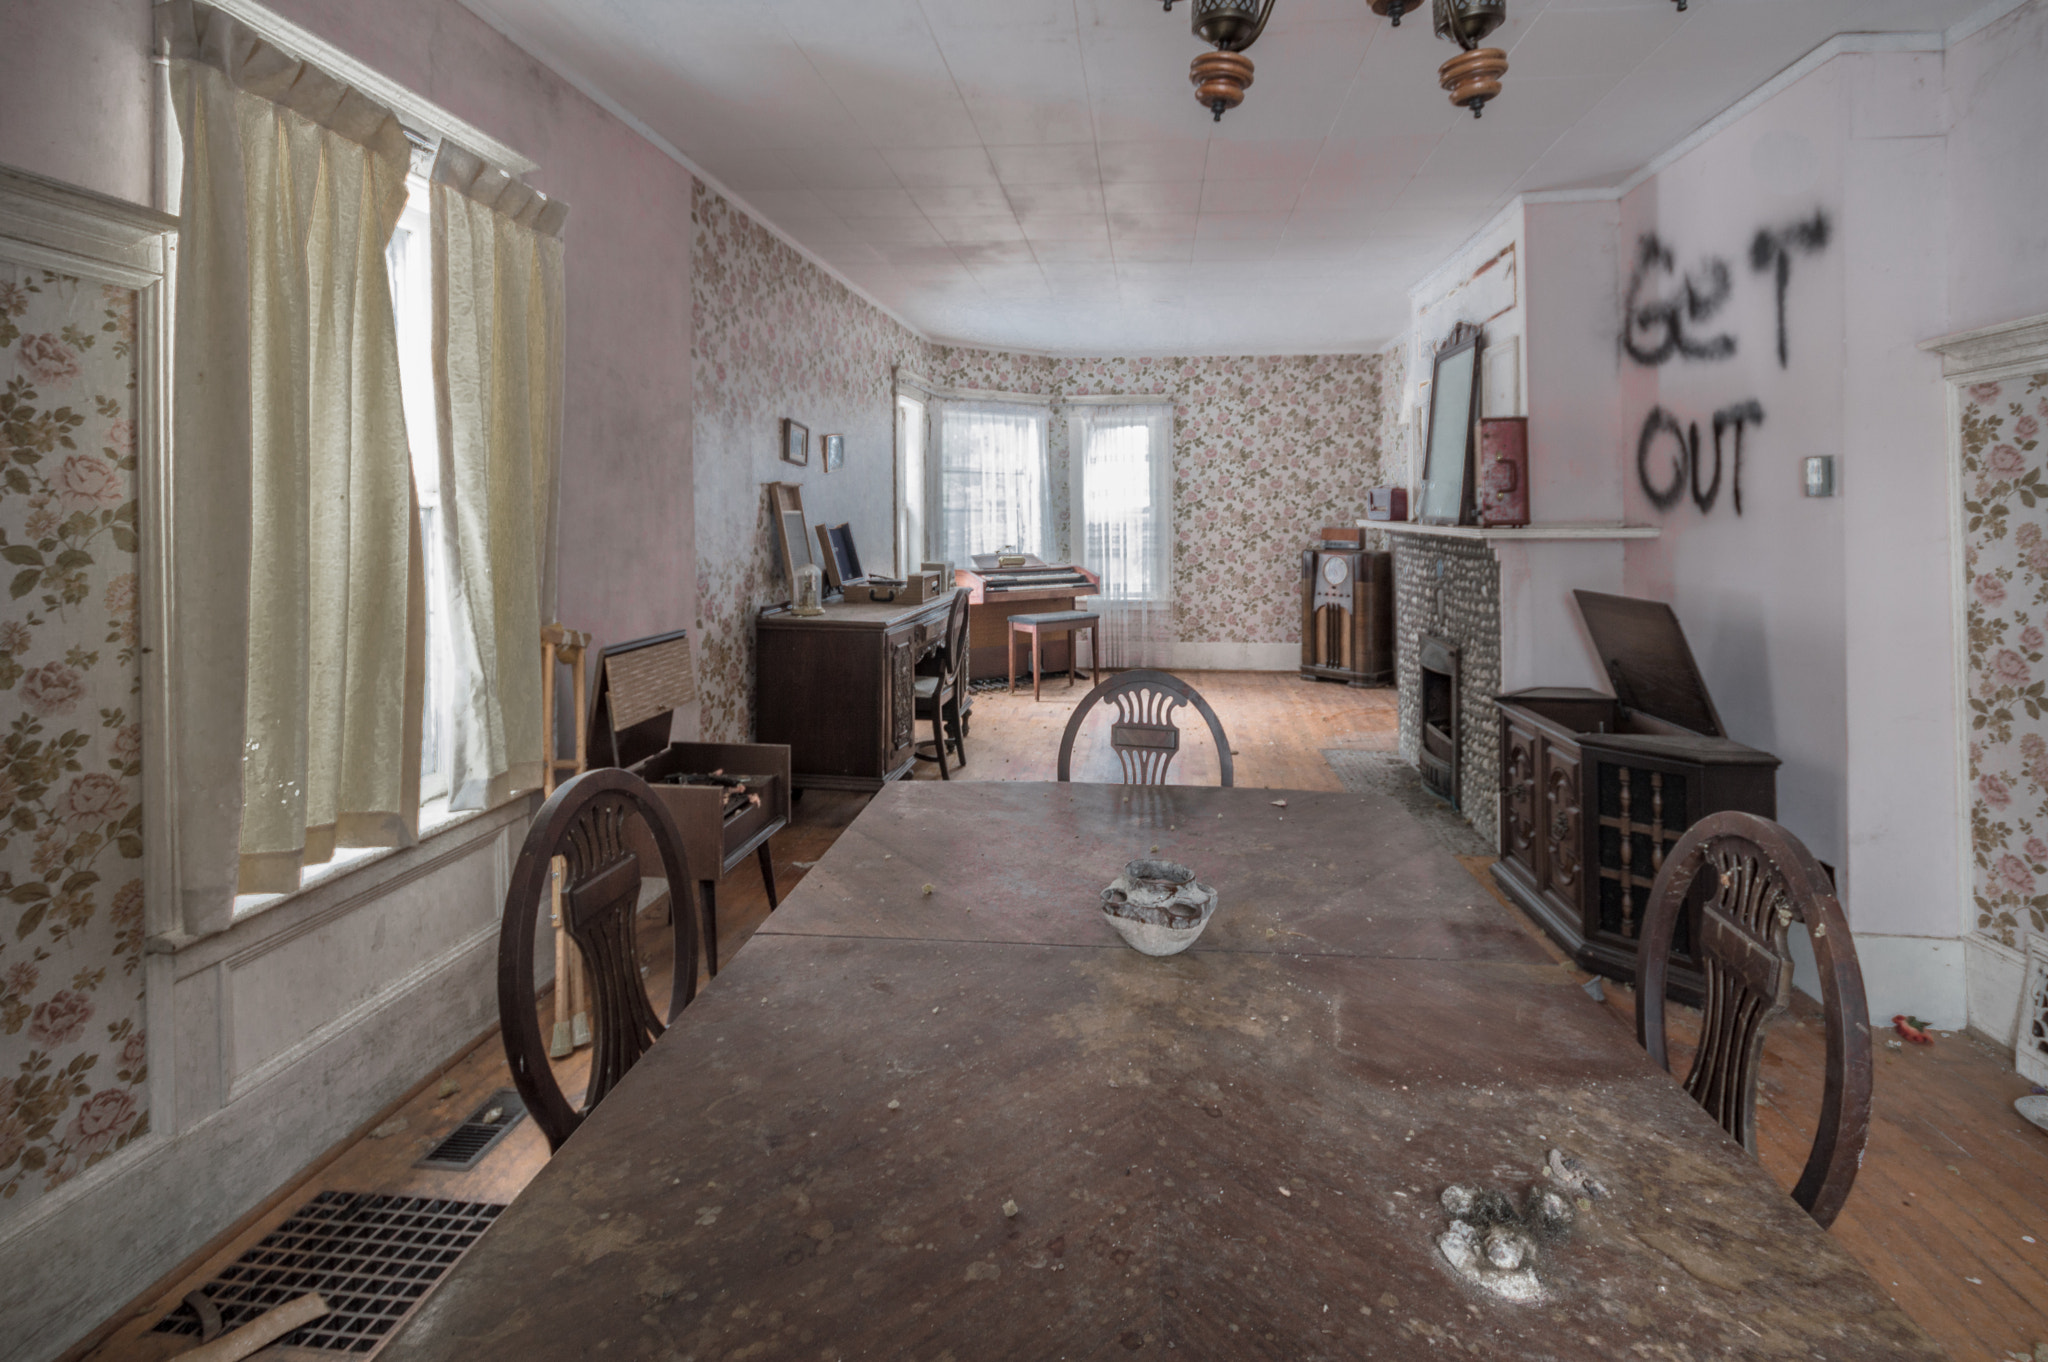 Nikon D3200 sample photo. Get out - abandoned house photography